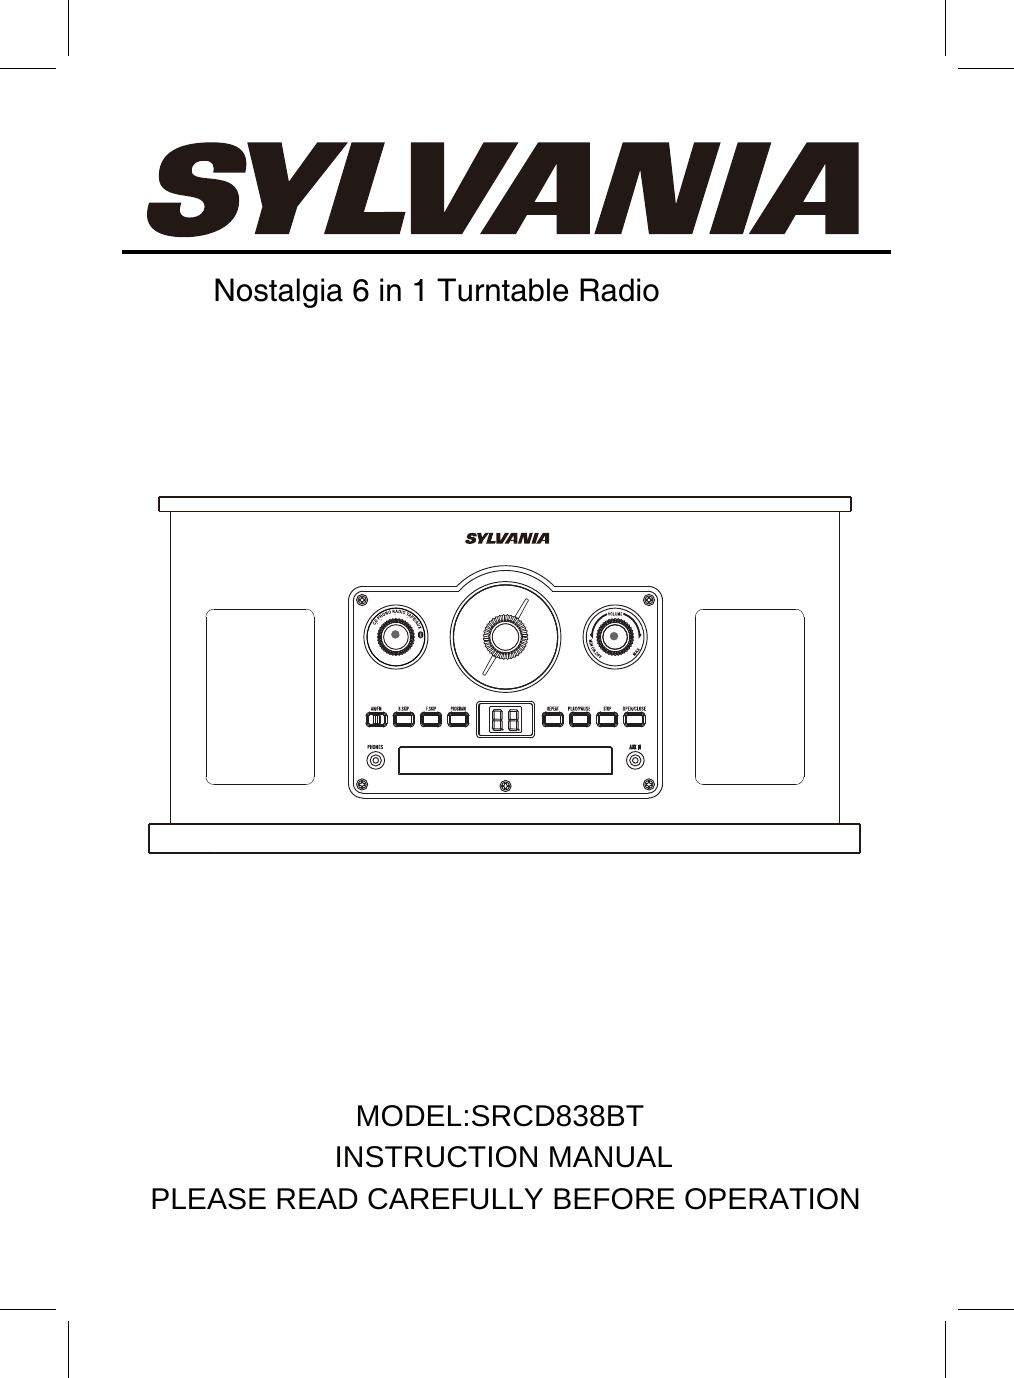 Page 1 of Junlan Electronic SRCD838BT Nostalgia 6 in 1 Turntable Radio User Manual                     1